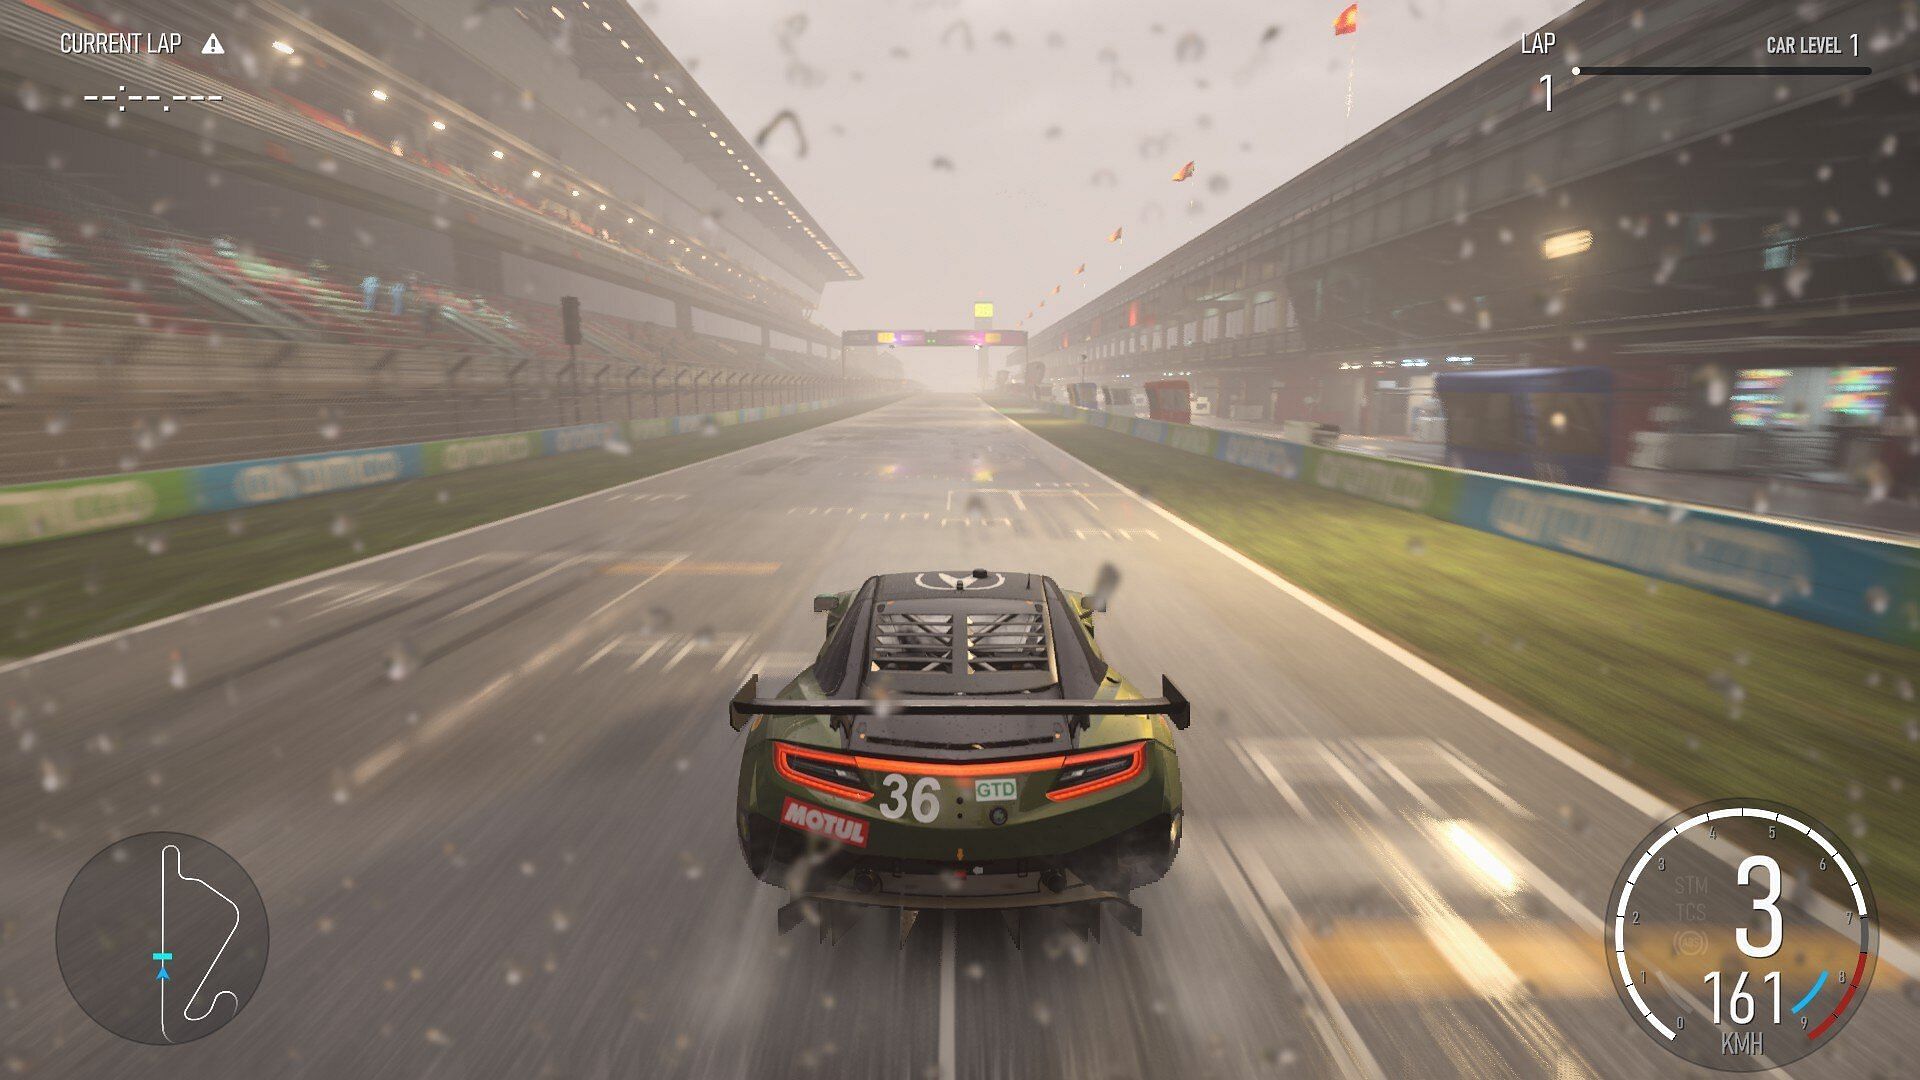 The FRR system update in Motorsport could be expected to benefit both the Turn10 Studios and Playground Games. (Image via Turn10 Studios)